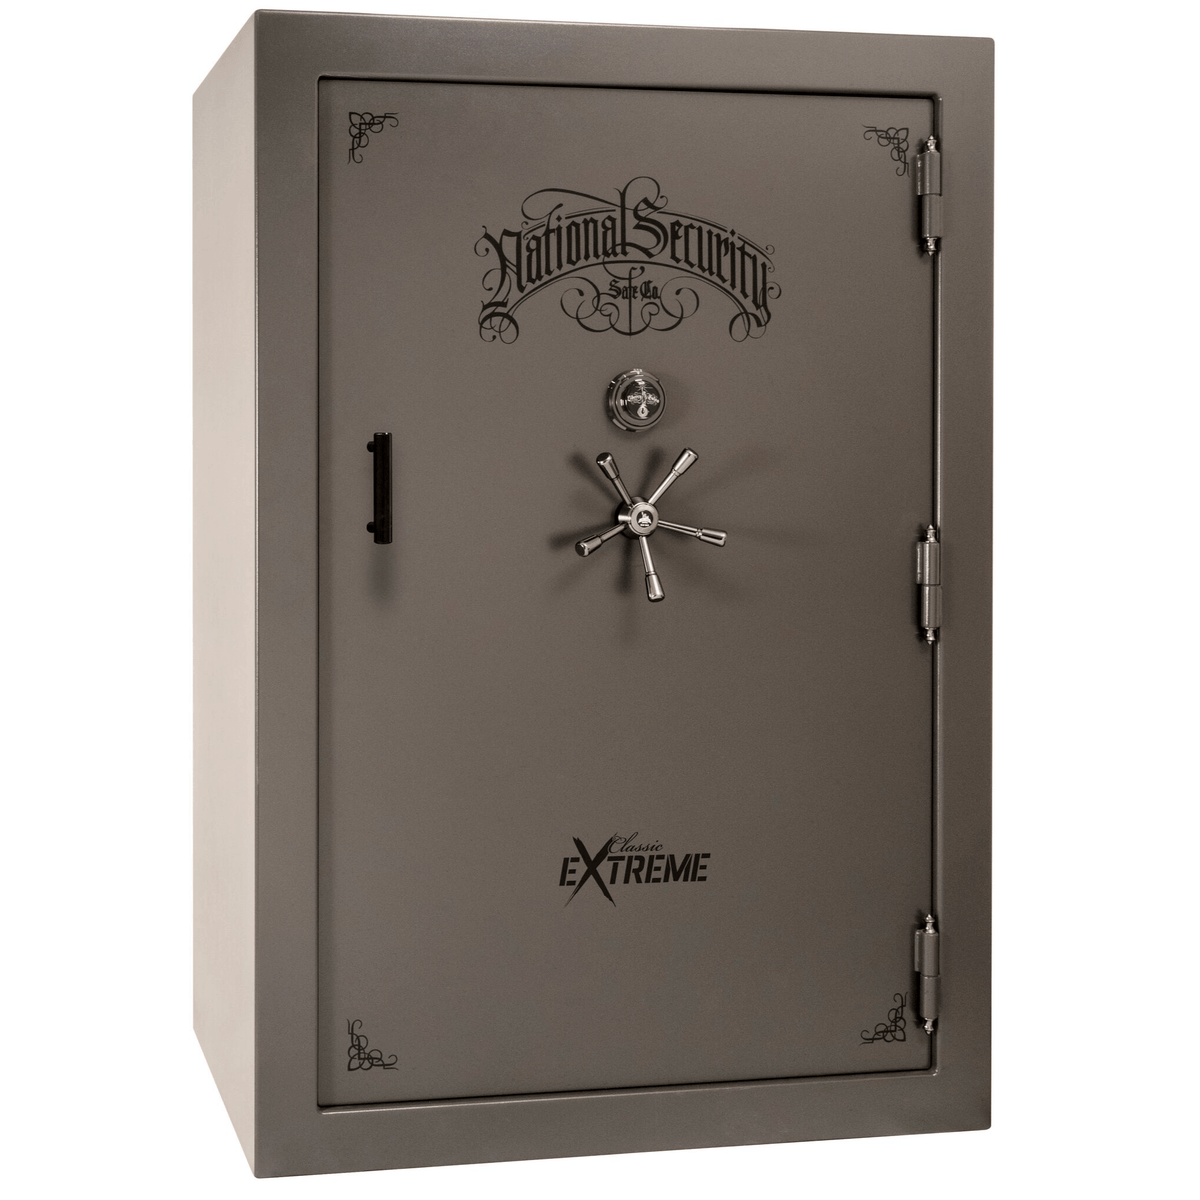 Liberty Classic Select Extreme Wide Body Safe in Gray Marble with Black Chrome Mechanical Lock.